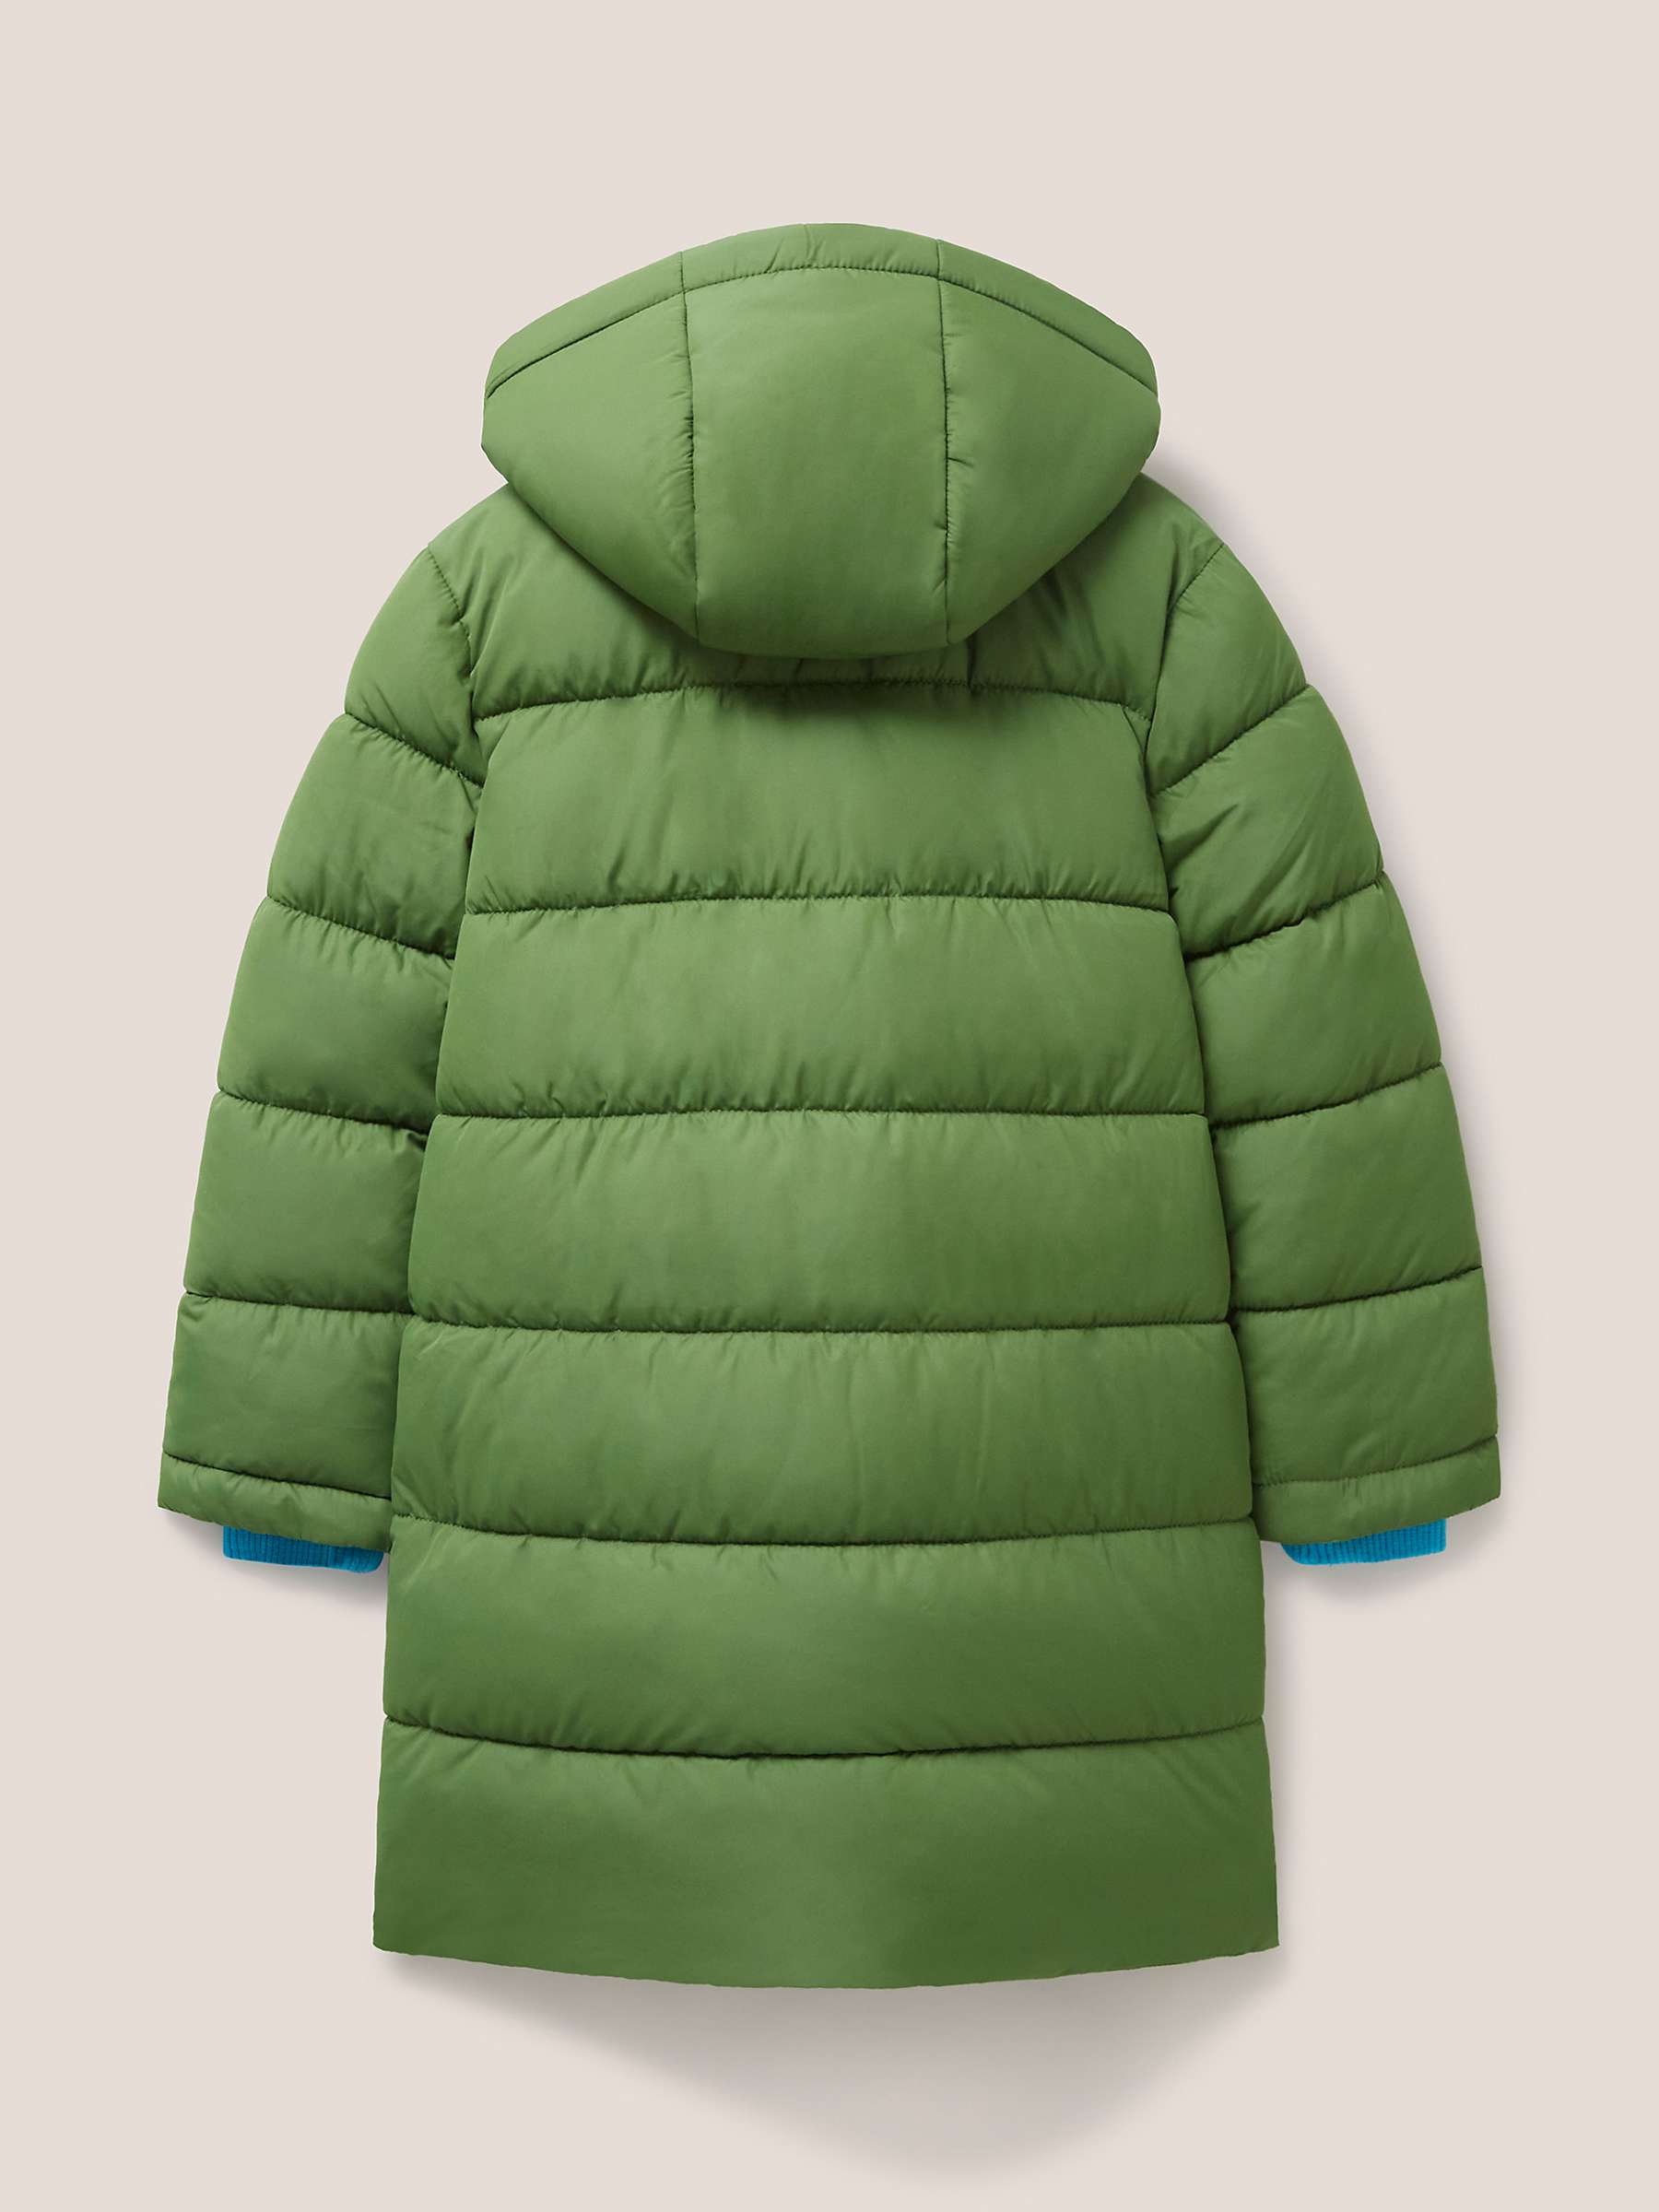 Buy White Stuff Kids' Longline Quilted Hooded Puffer Jacket, Mid Teal Online at johnlewis.com